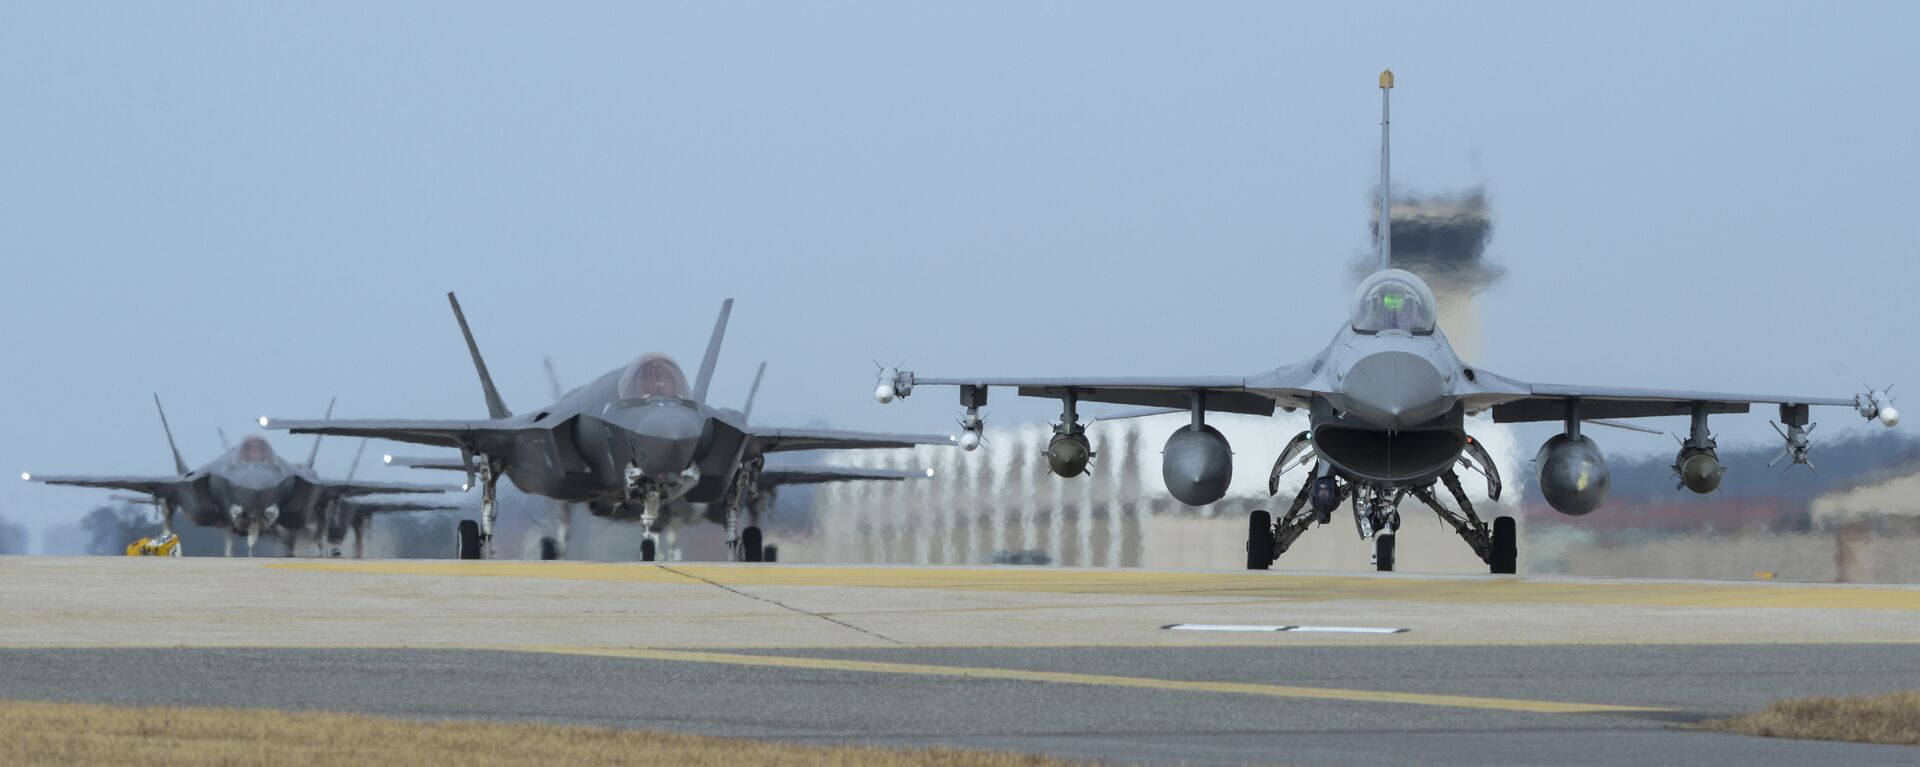 U.S. Air Force F-16 Fighting Falcon, right, and F-35A Lightning IIs assigned to the 34th Expeditionary Fighter Squadron Hill Air Force Base, Utah, taxi toward the end of the runway during the exercise VIGILANT ACE 18 at Kunsan Air Base, South Korea - Sputnik International, 1920, 24.08.2022